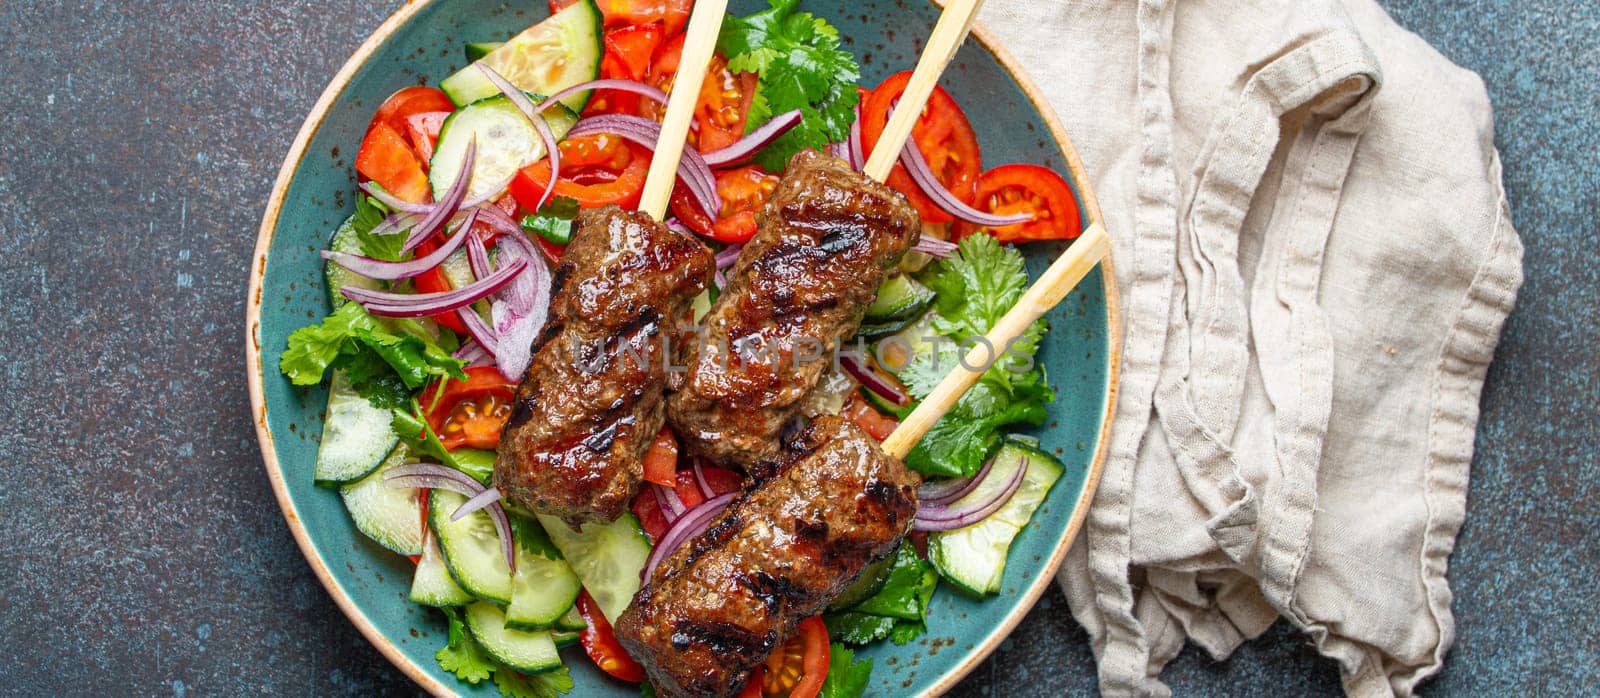 Grilled skewer meat beef kebabs on sticks served with fresh vegetables salad on plate on rustic concrete background from above. Traditional Middle Eastern, Turkish dish Kebab by its_al_dente